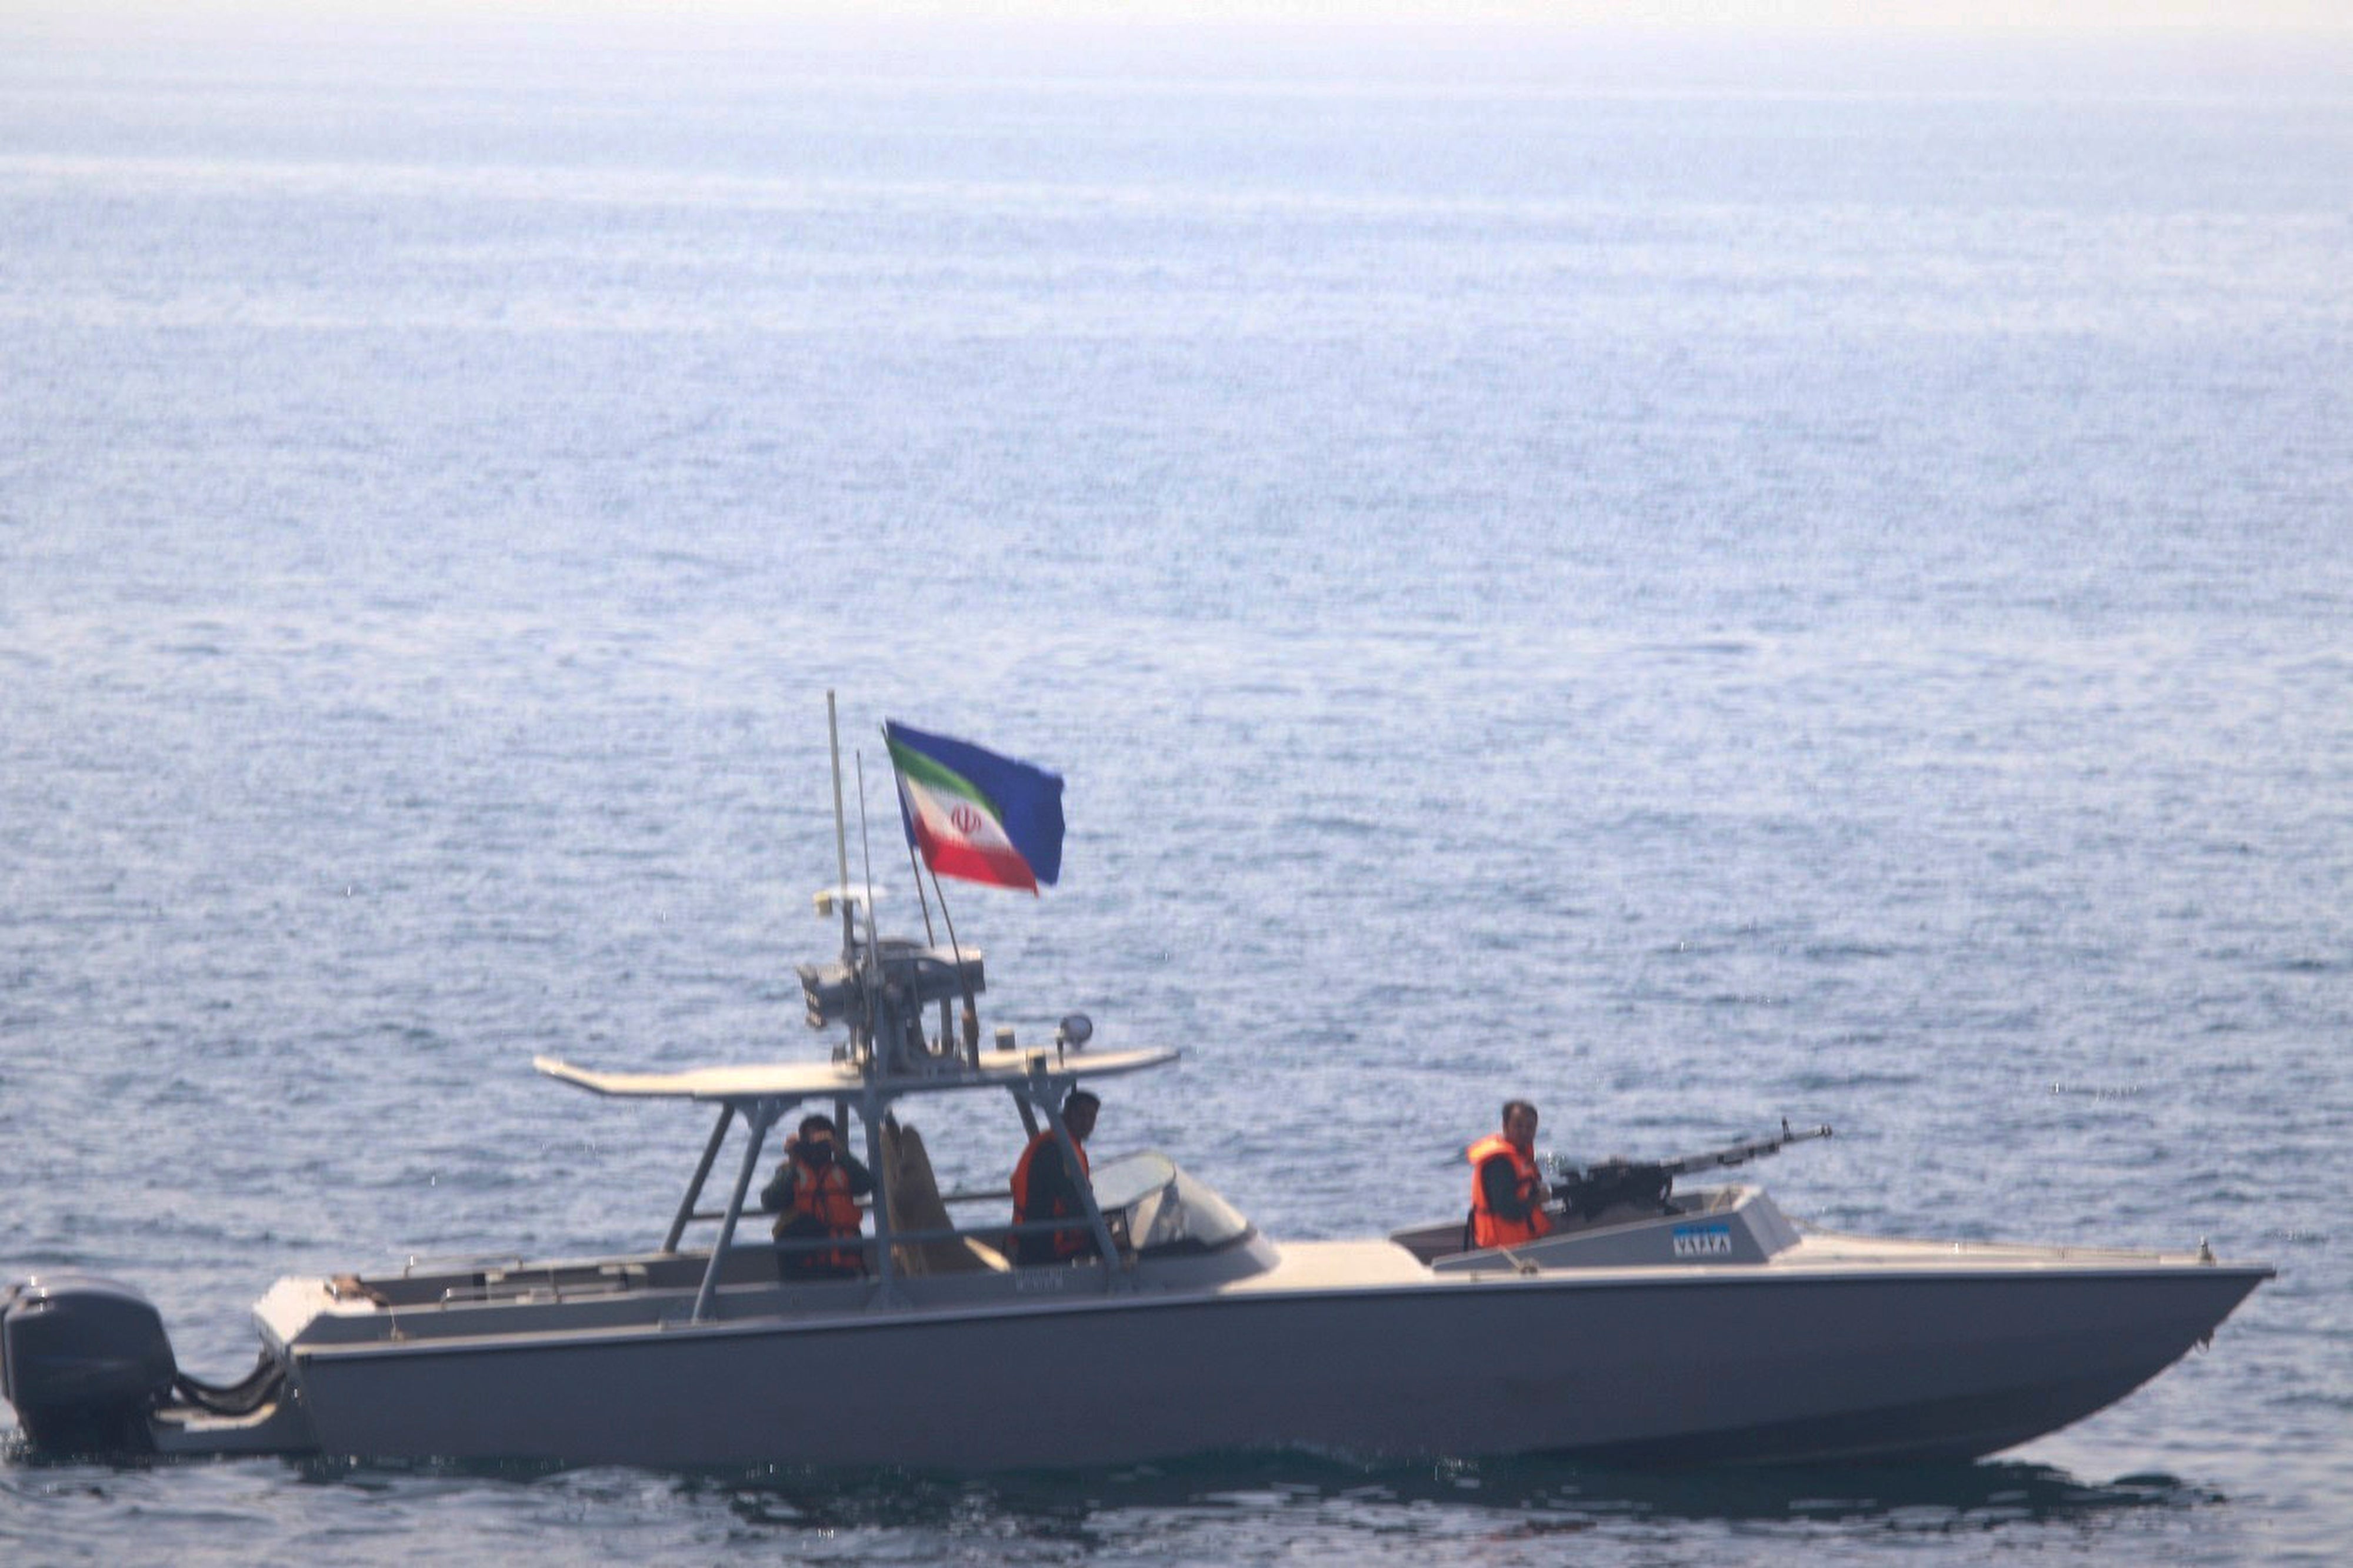 A boat from Iran’s Islamic Revolutionary Guard Corps Navy came into close proximity to the US Navy ships in the Strait of Hormuz